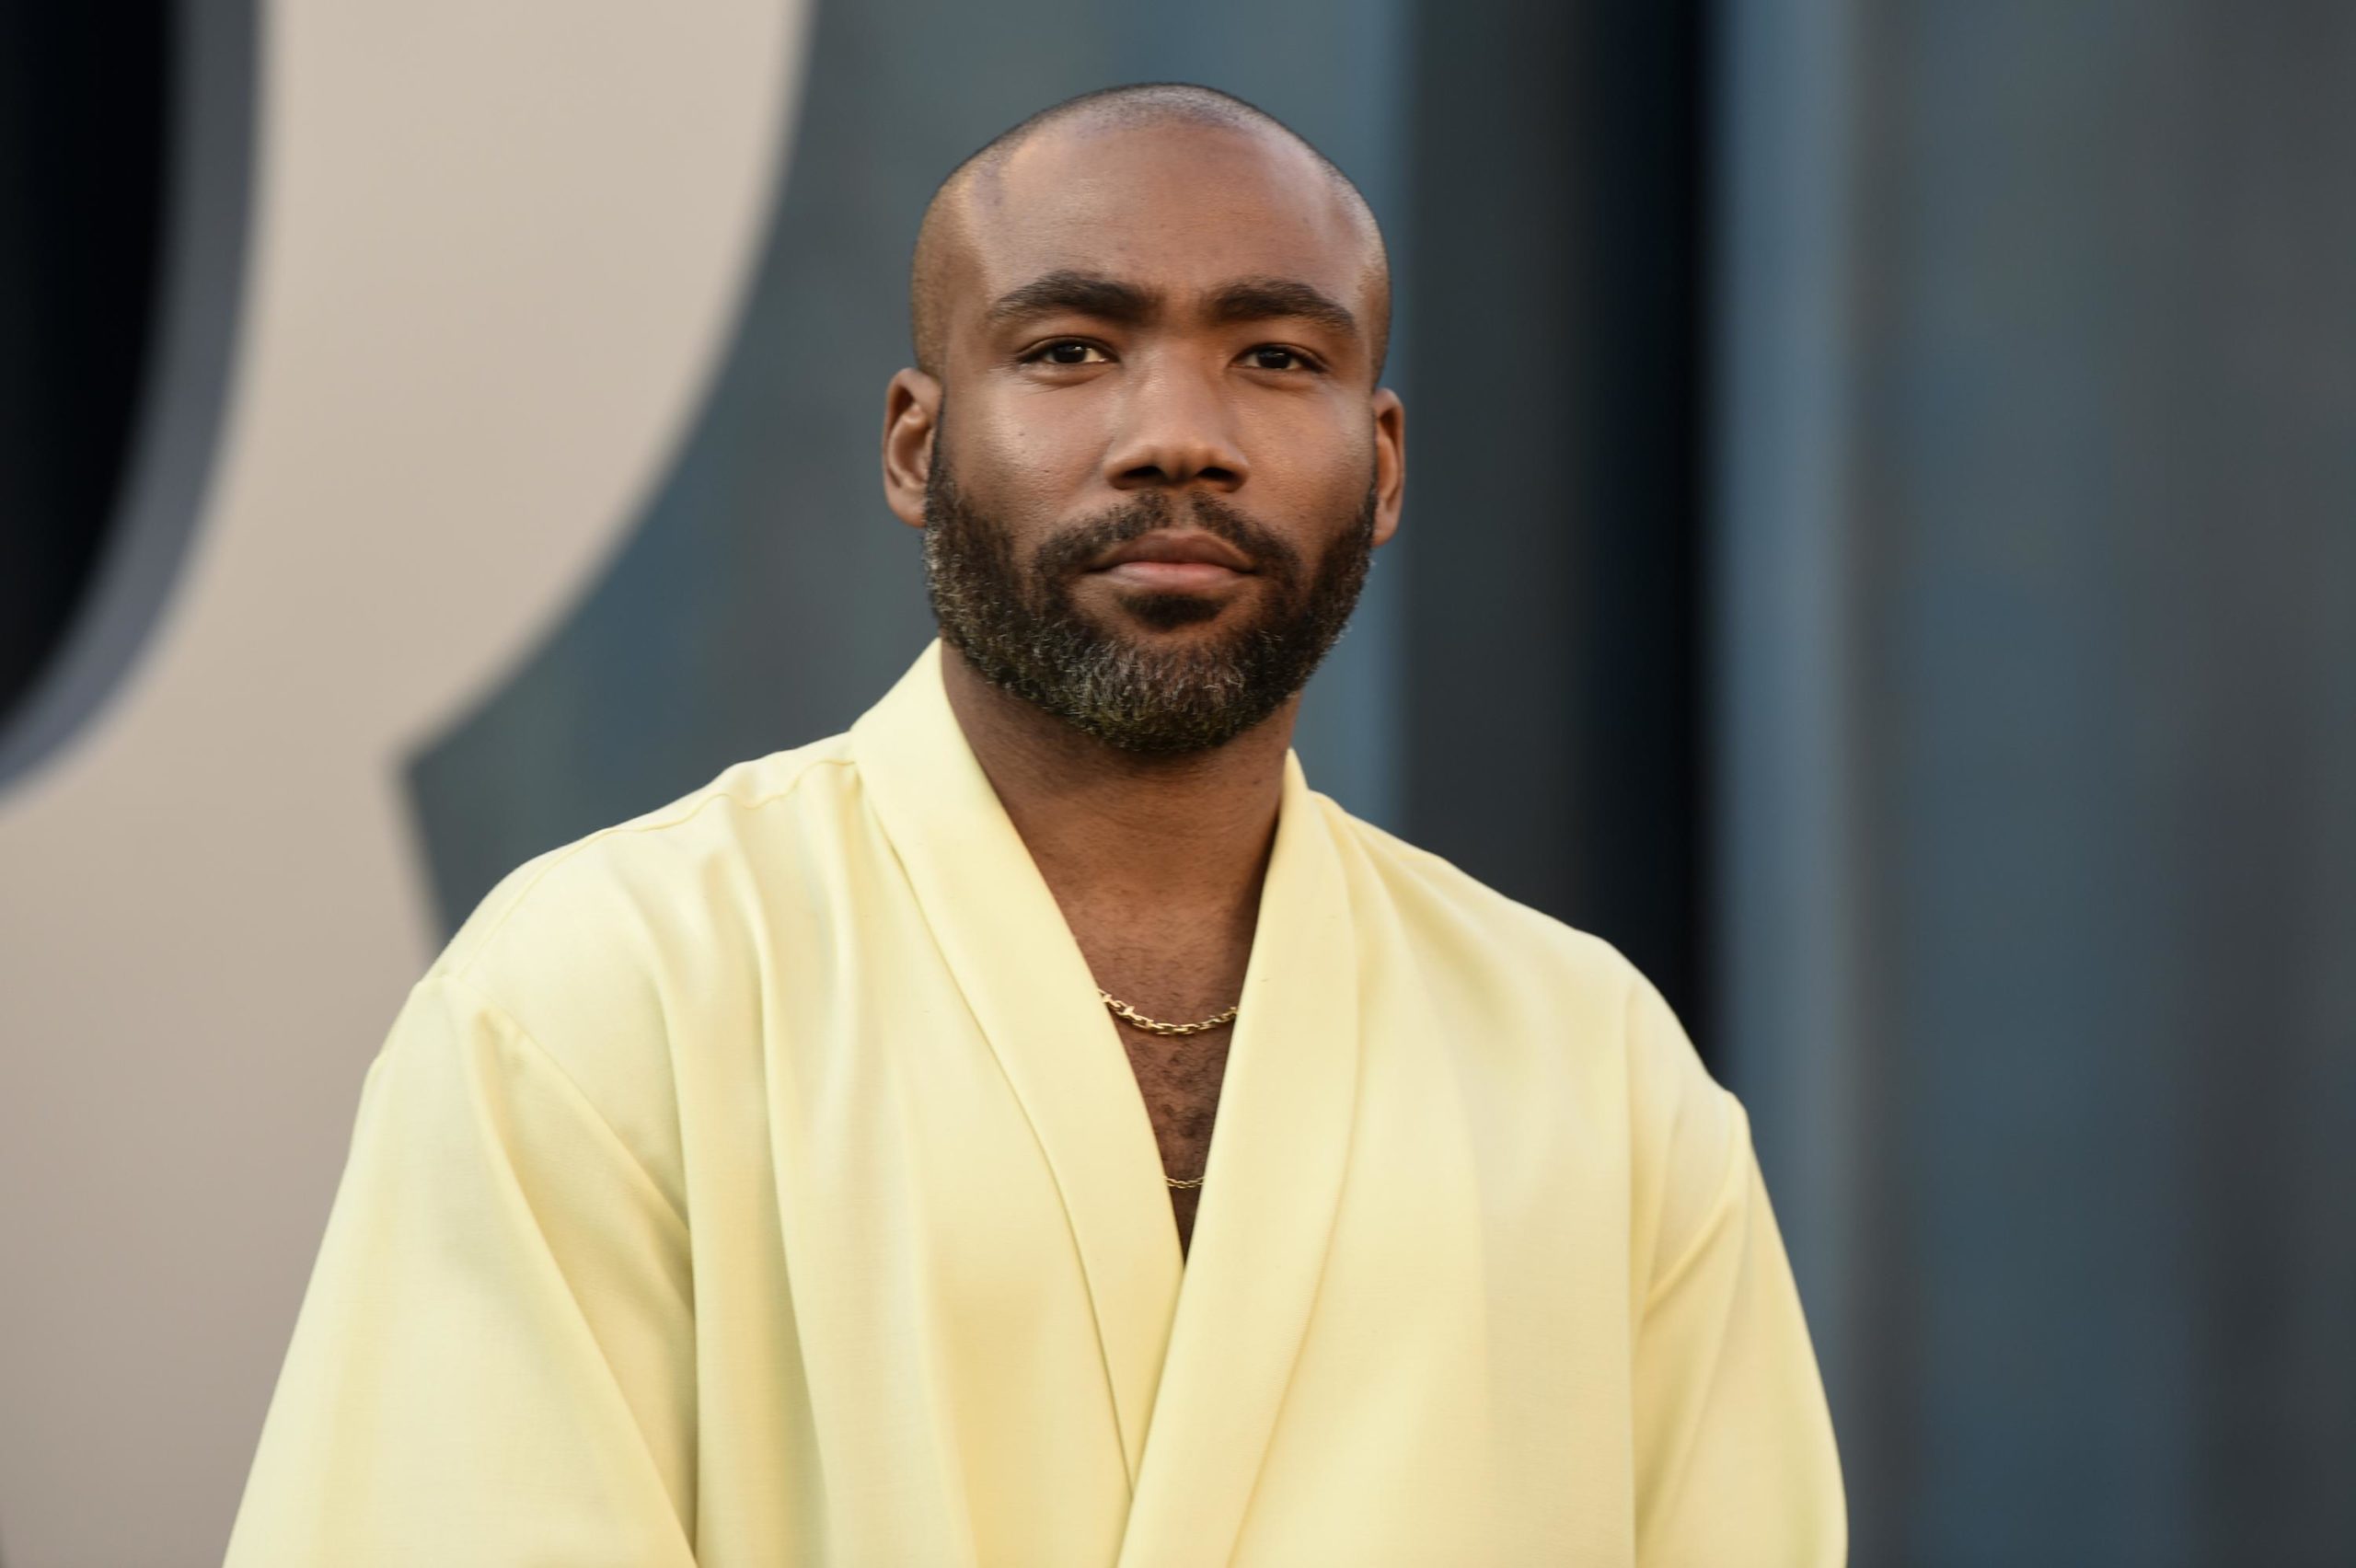 Donald Glover Biography [2022]: Age, Height, Net Worth, Wife, Parents, Popular Movies and TV Shows